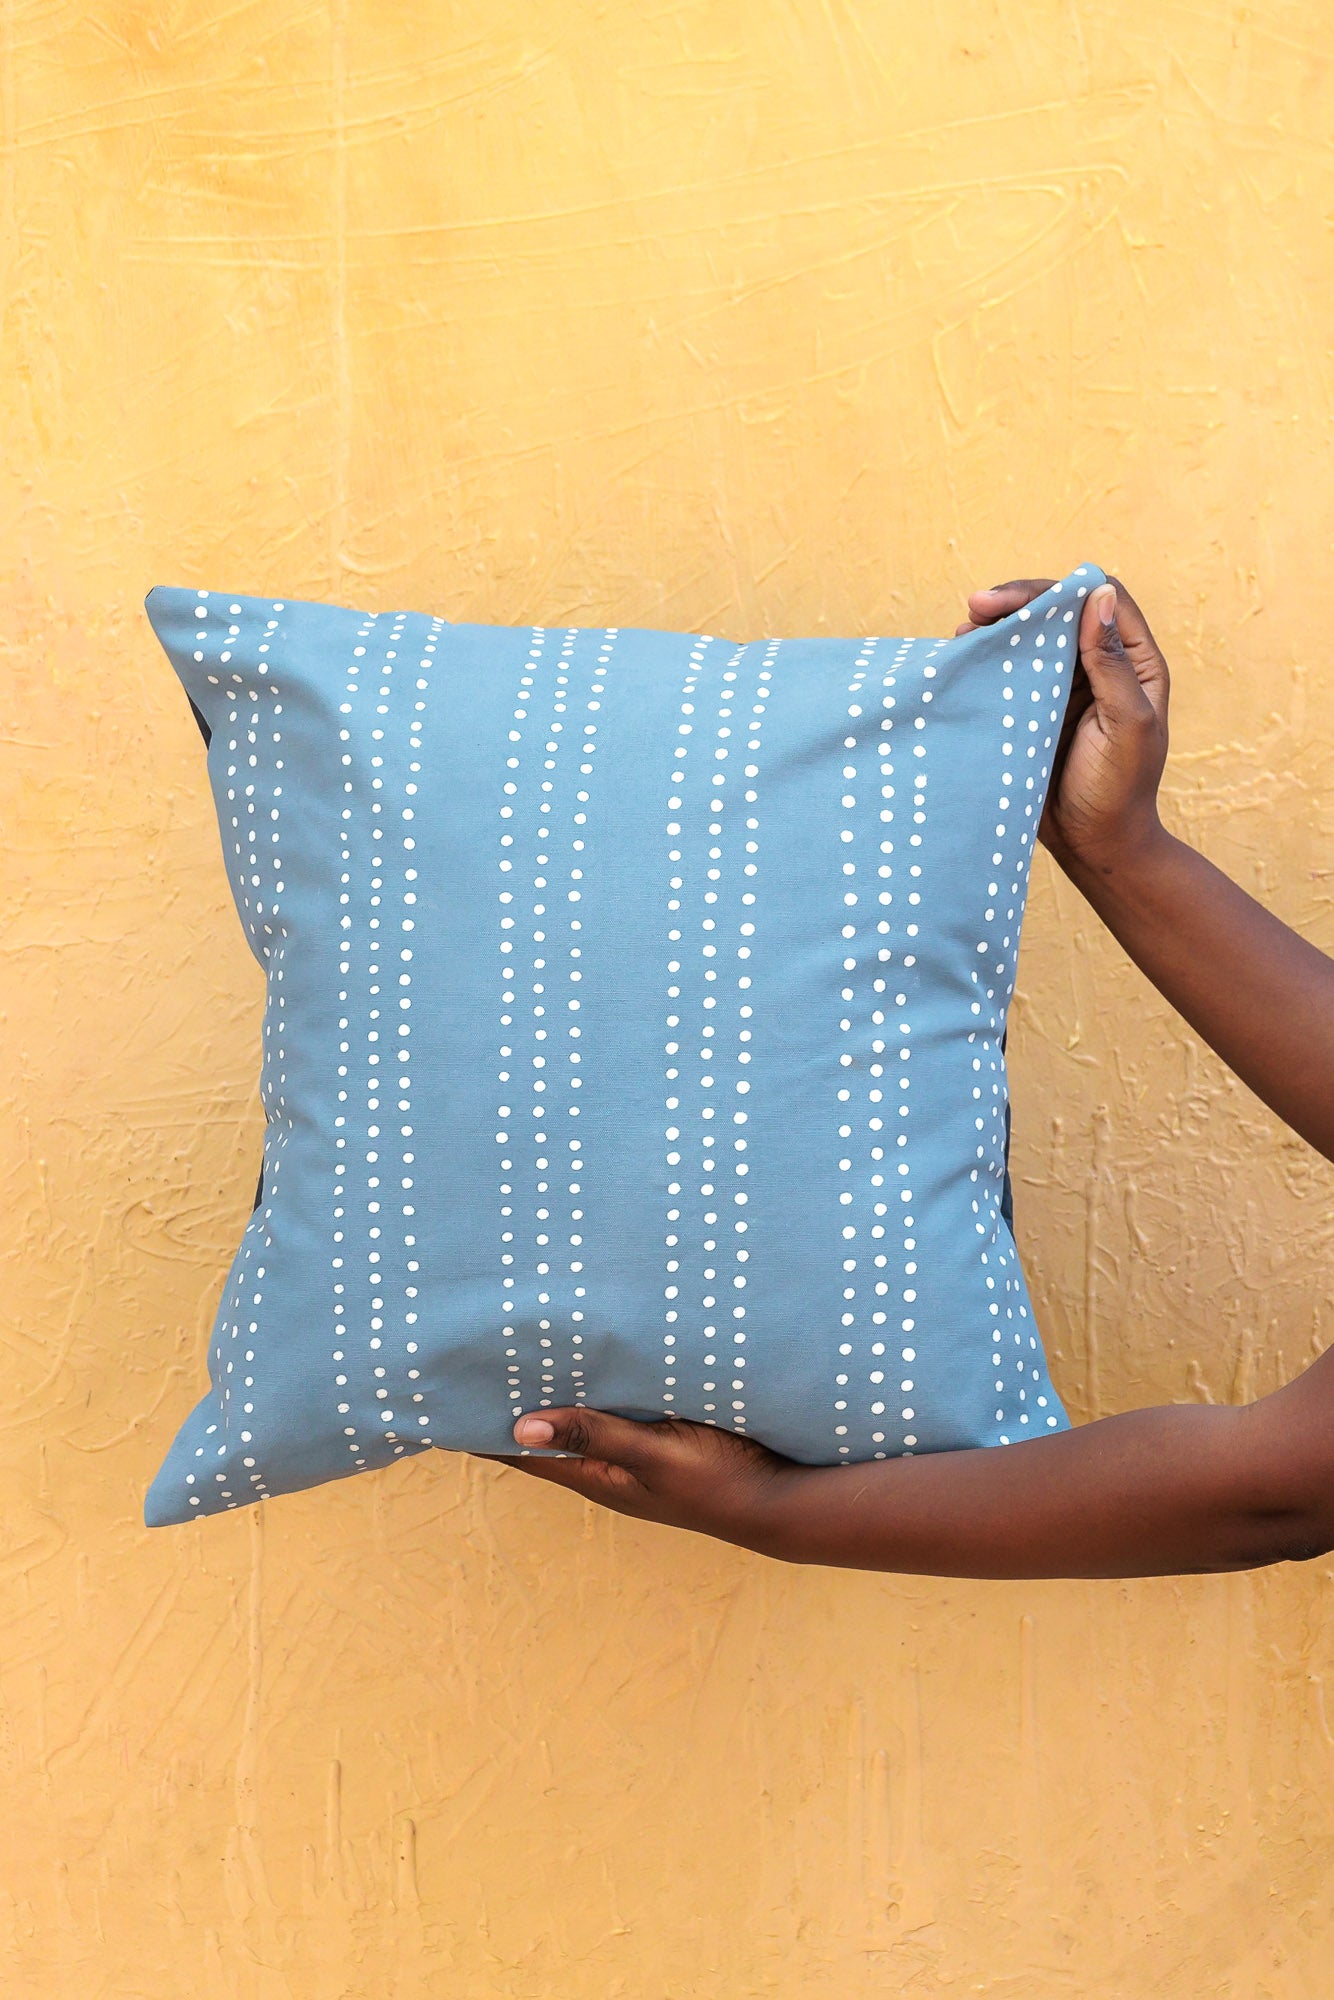 Tribal Cloth Indigo Dots Cushion Cover - Hand Painted by TRIBAL TEXTILES - Handcrafted Home Decor Interiors - African Made